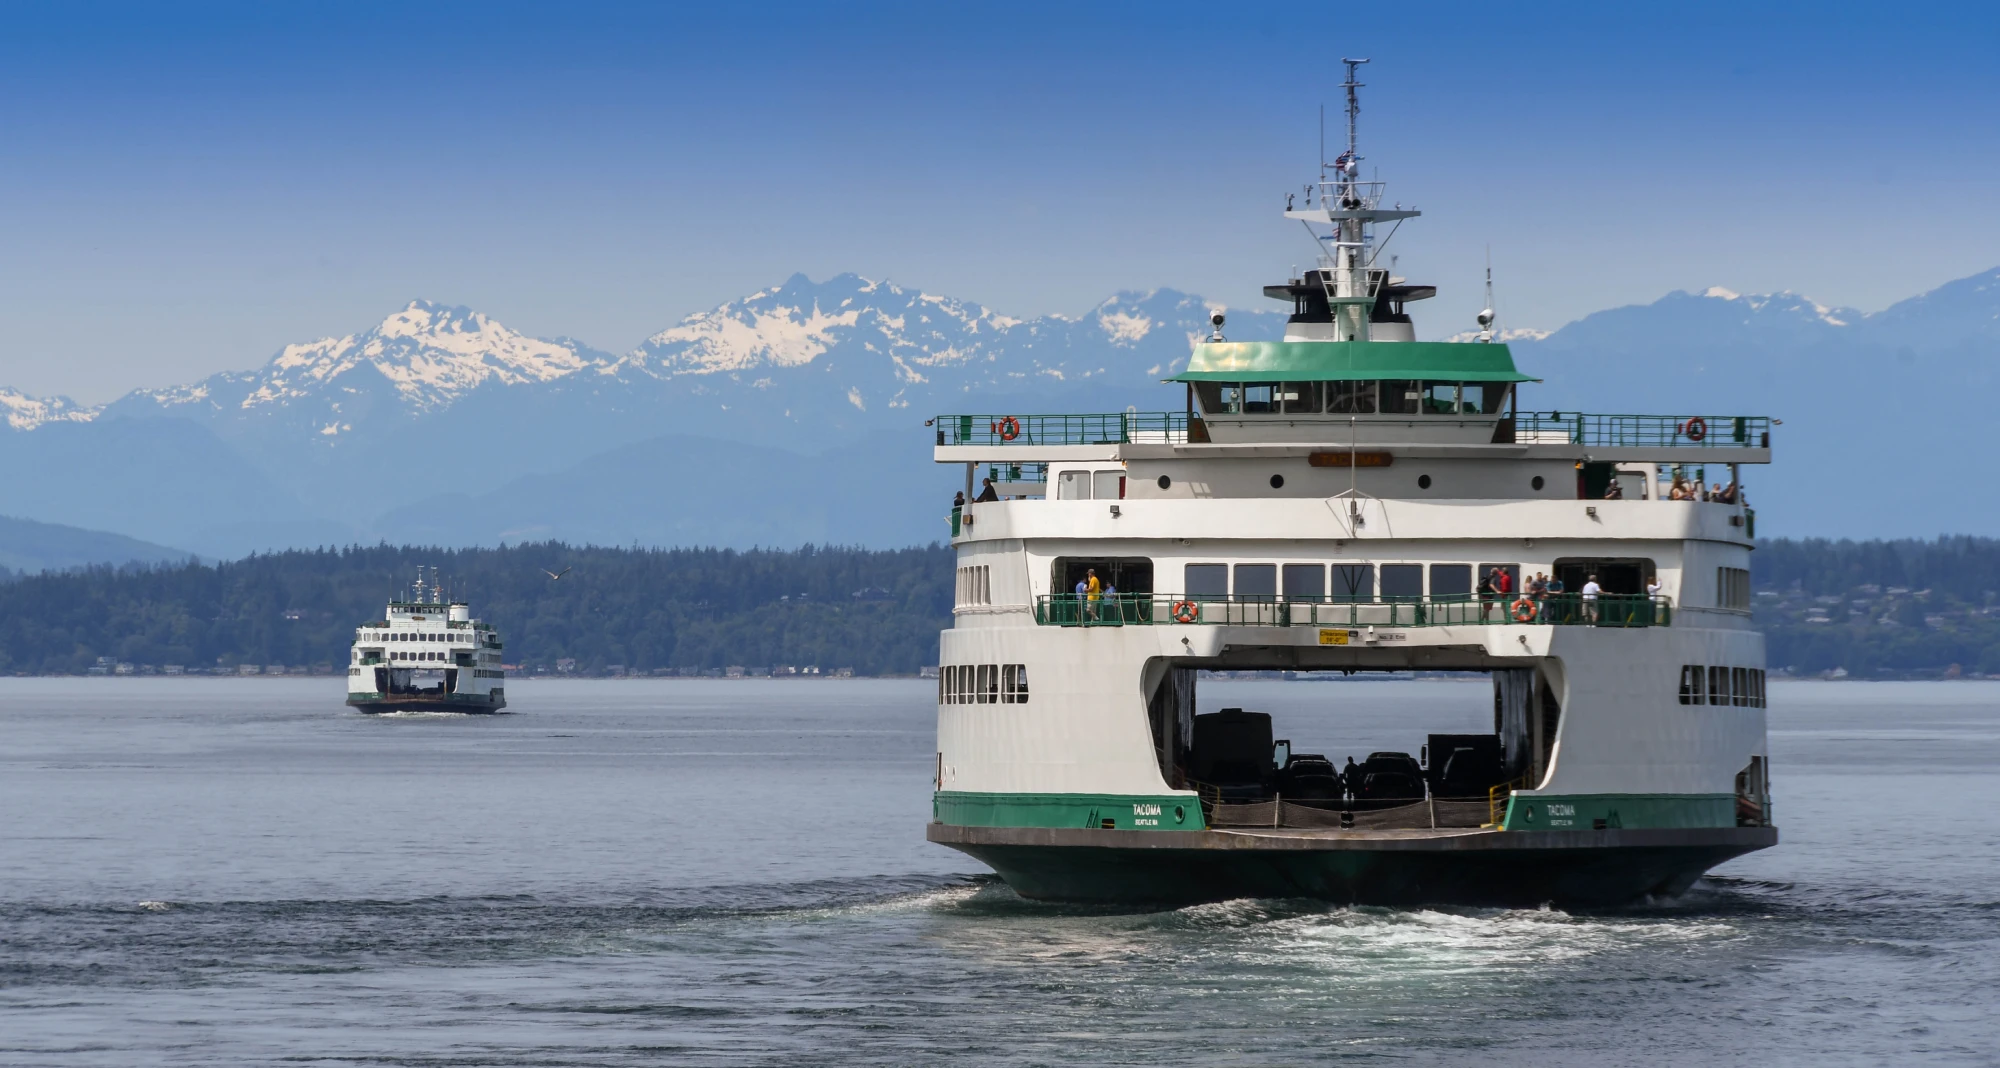 A large passenger and car ferry departs Seattle to cross Puget Sound. In the distance is another passenger and car ferry arriving in Seattle. In the background are the snowcapped Olympic Mountains.